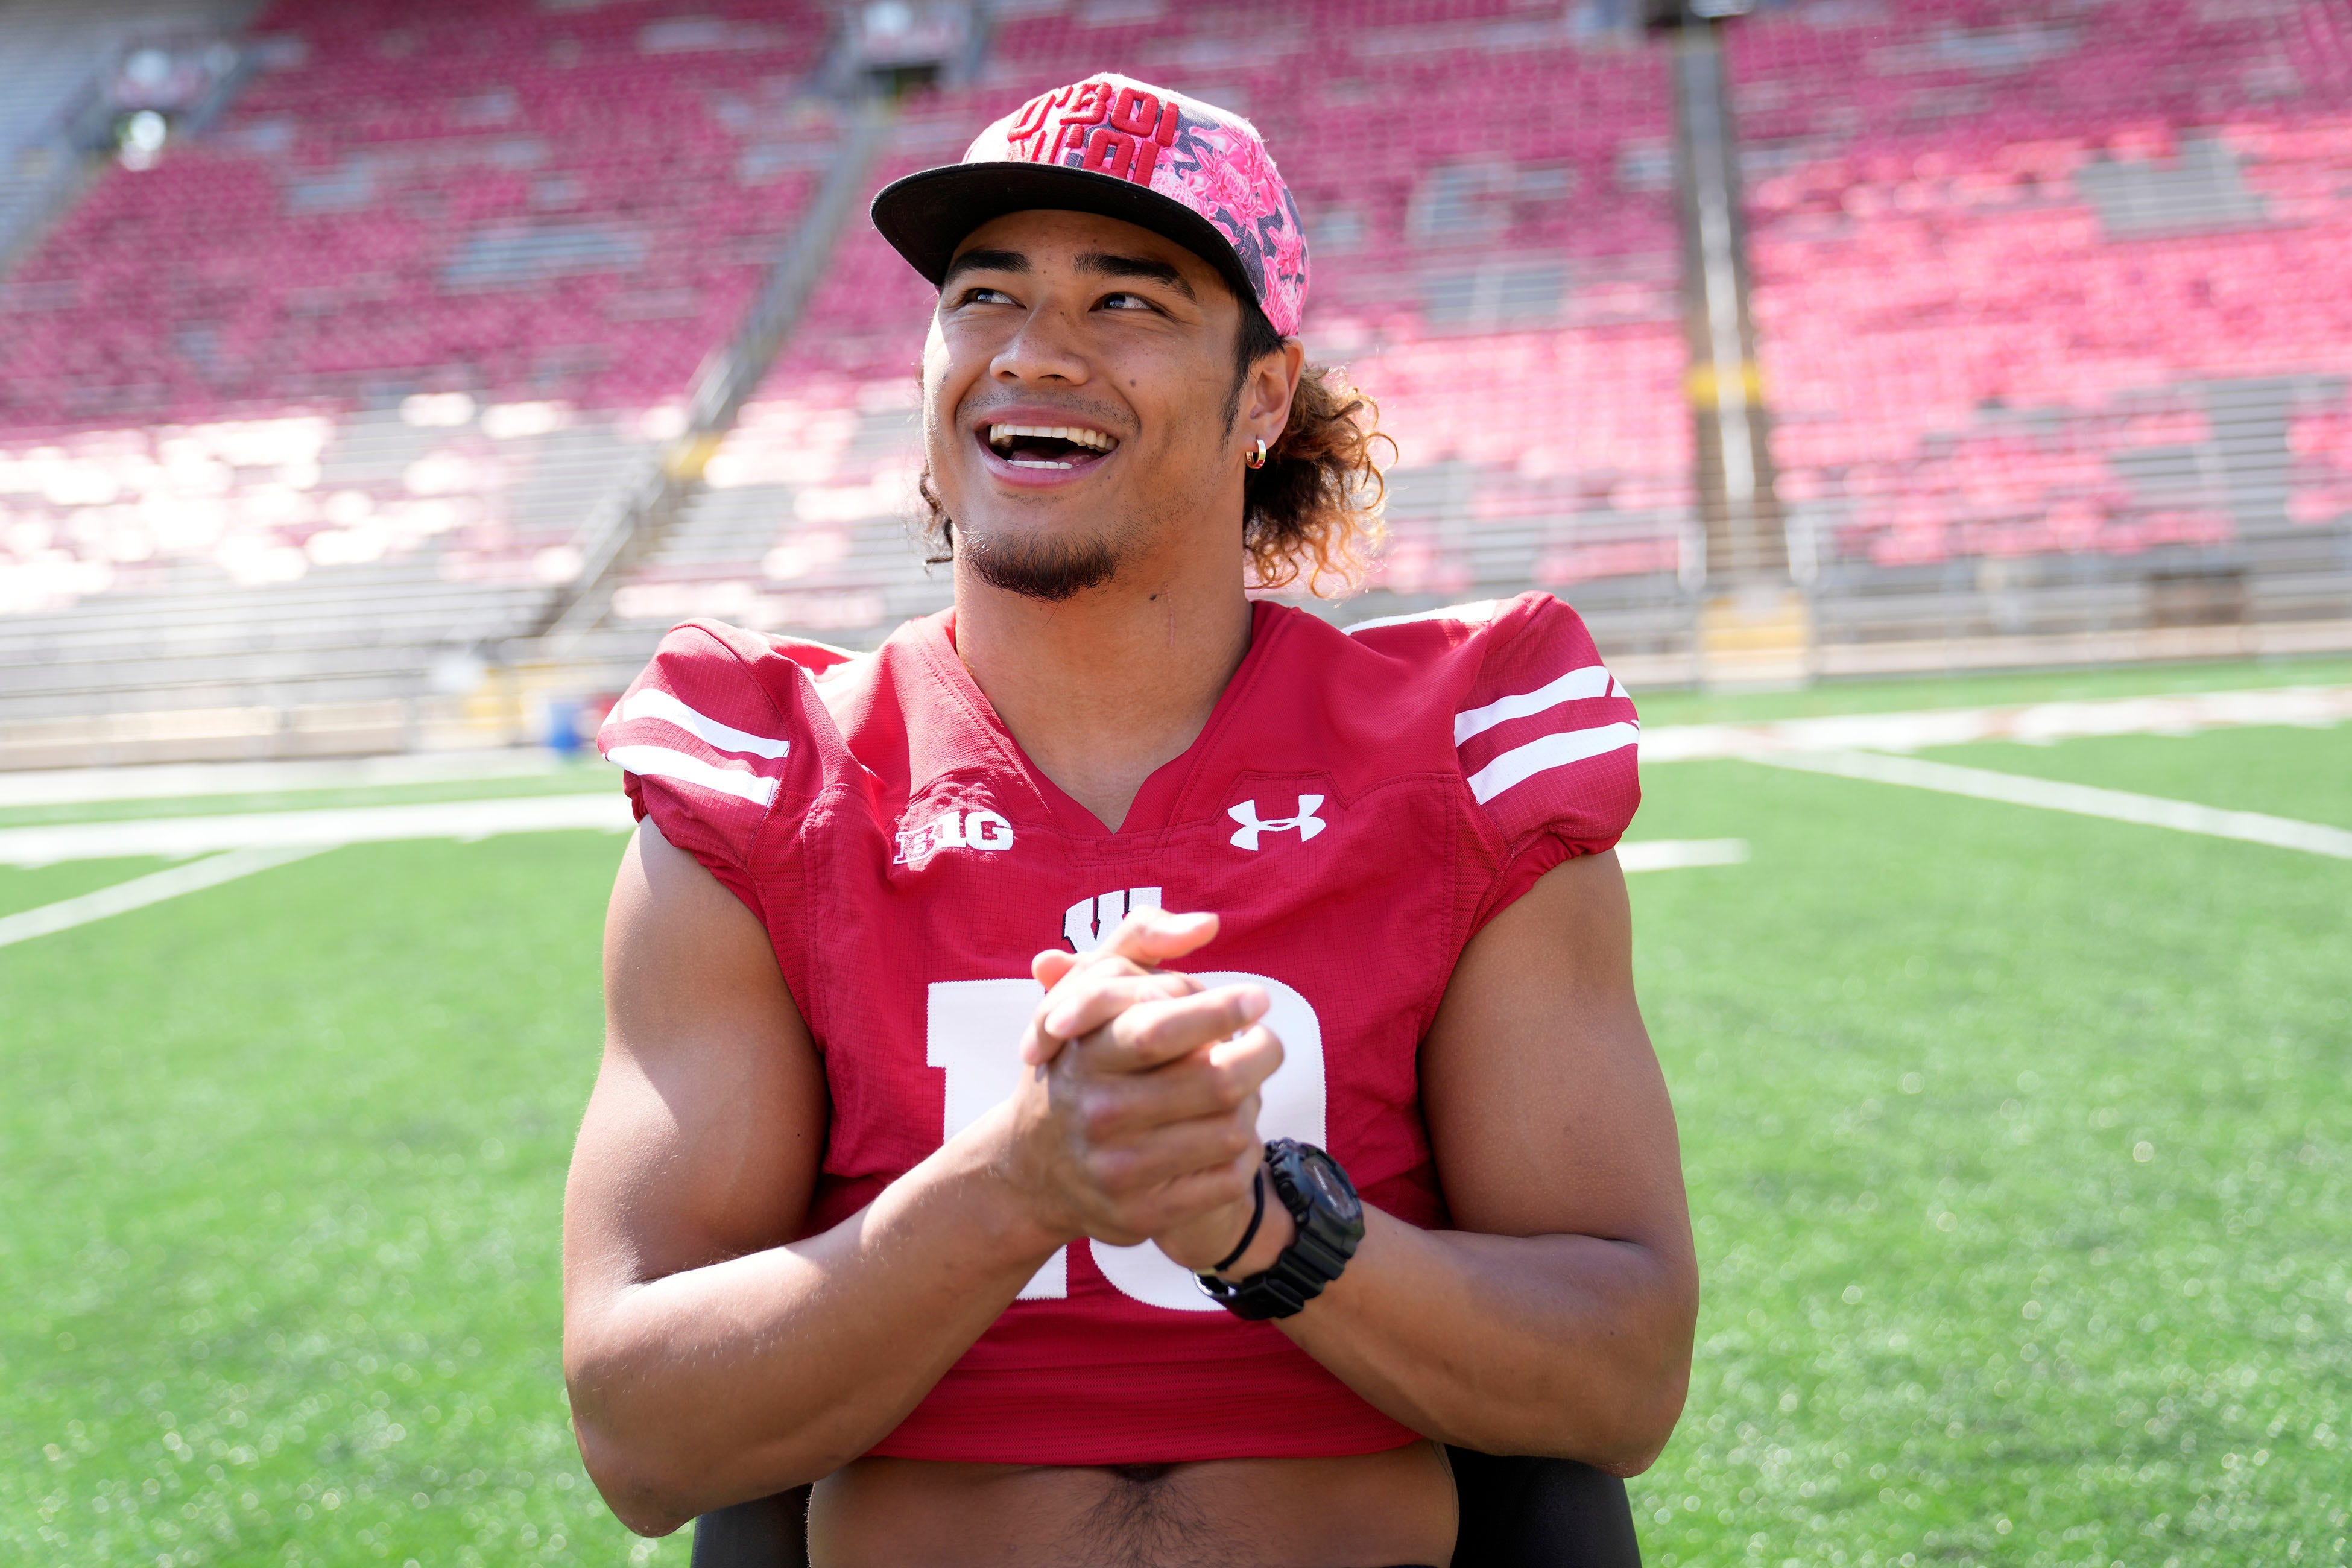 Wisconsin Badgers safety  Kamo'i Latu  smiles as he answers questions from the media as part of Wisconsin Badgers menâs football media day at the McClain Center in Madison on Tuesday, Aug. 2, 2022.  Photo by Mike De Sisti / The Milwaukee Journal Sentinel